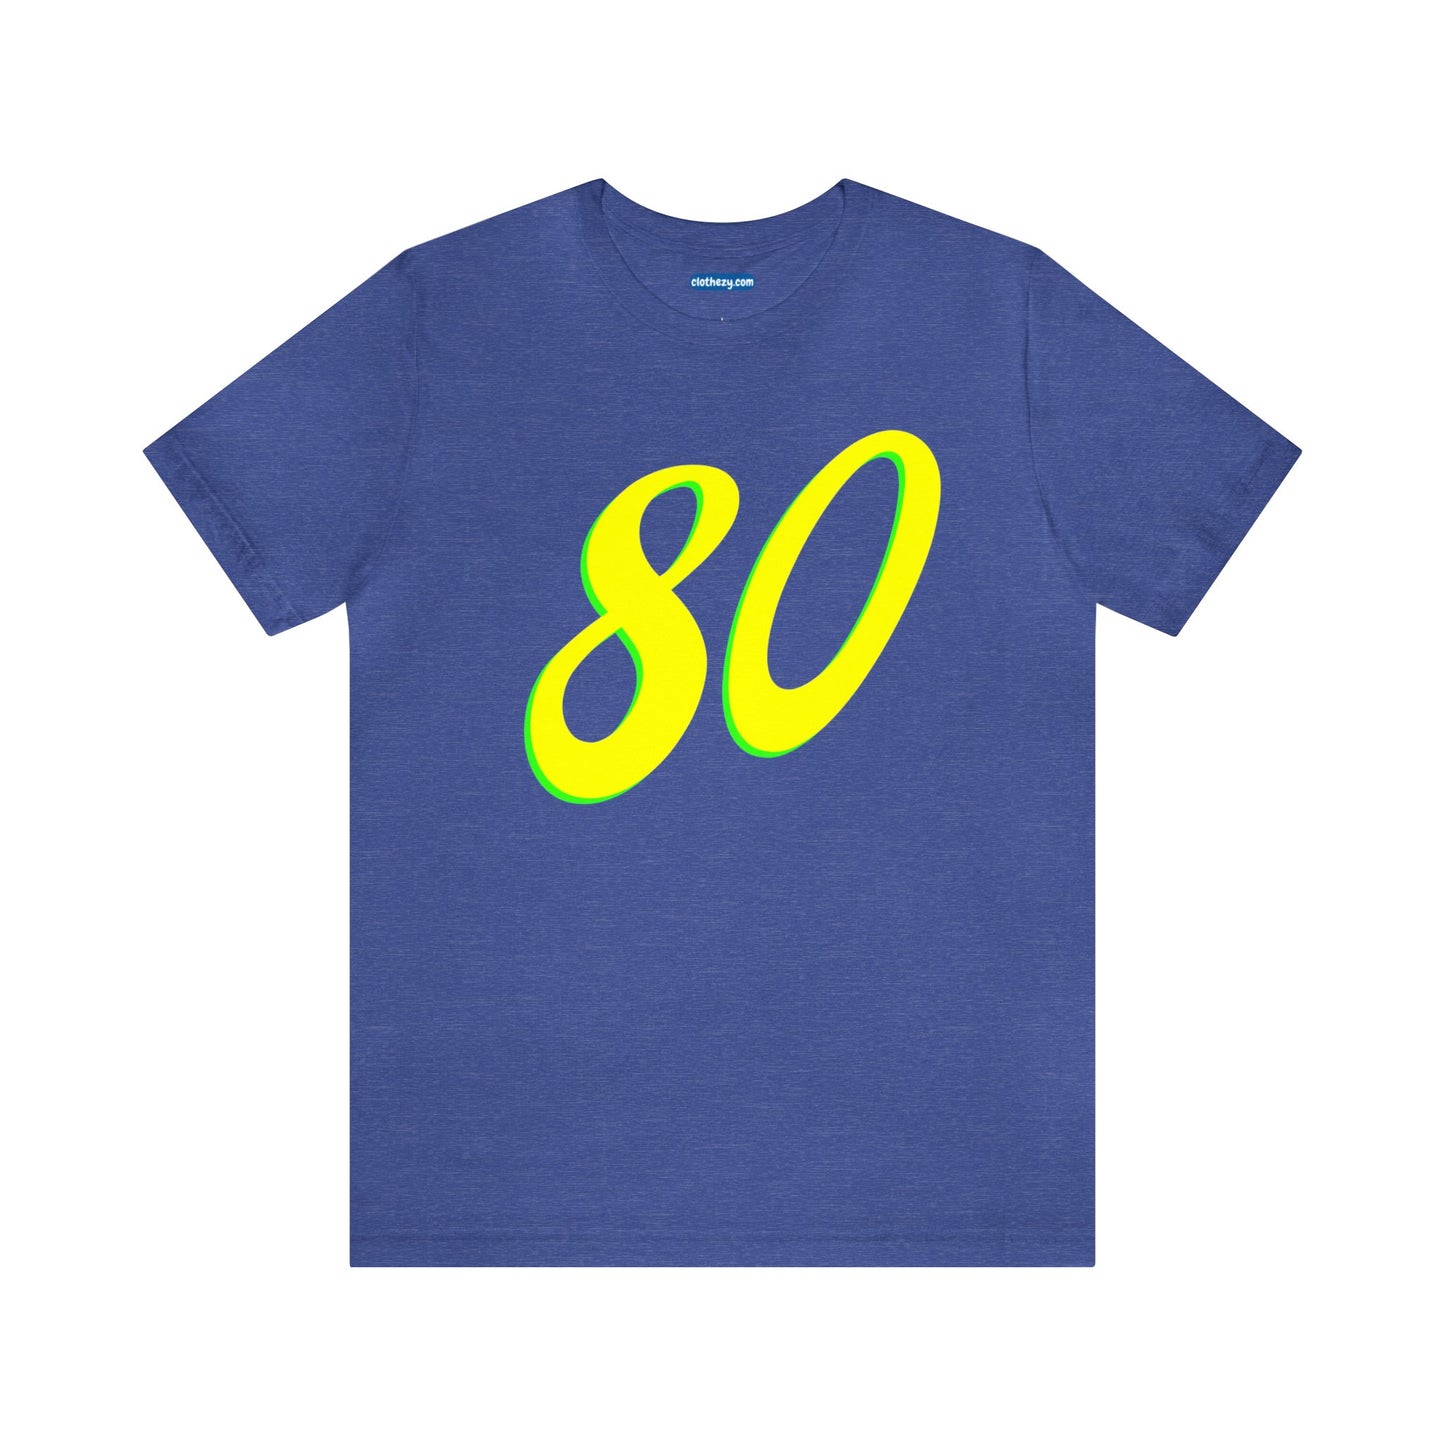 Number 80 Design - Soft Cotton Tee for birthdays and celebrations, Gift for friends and family, Multiple Options by clothezy.com in Navy Size Small - Buy Now